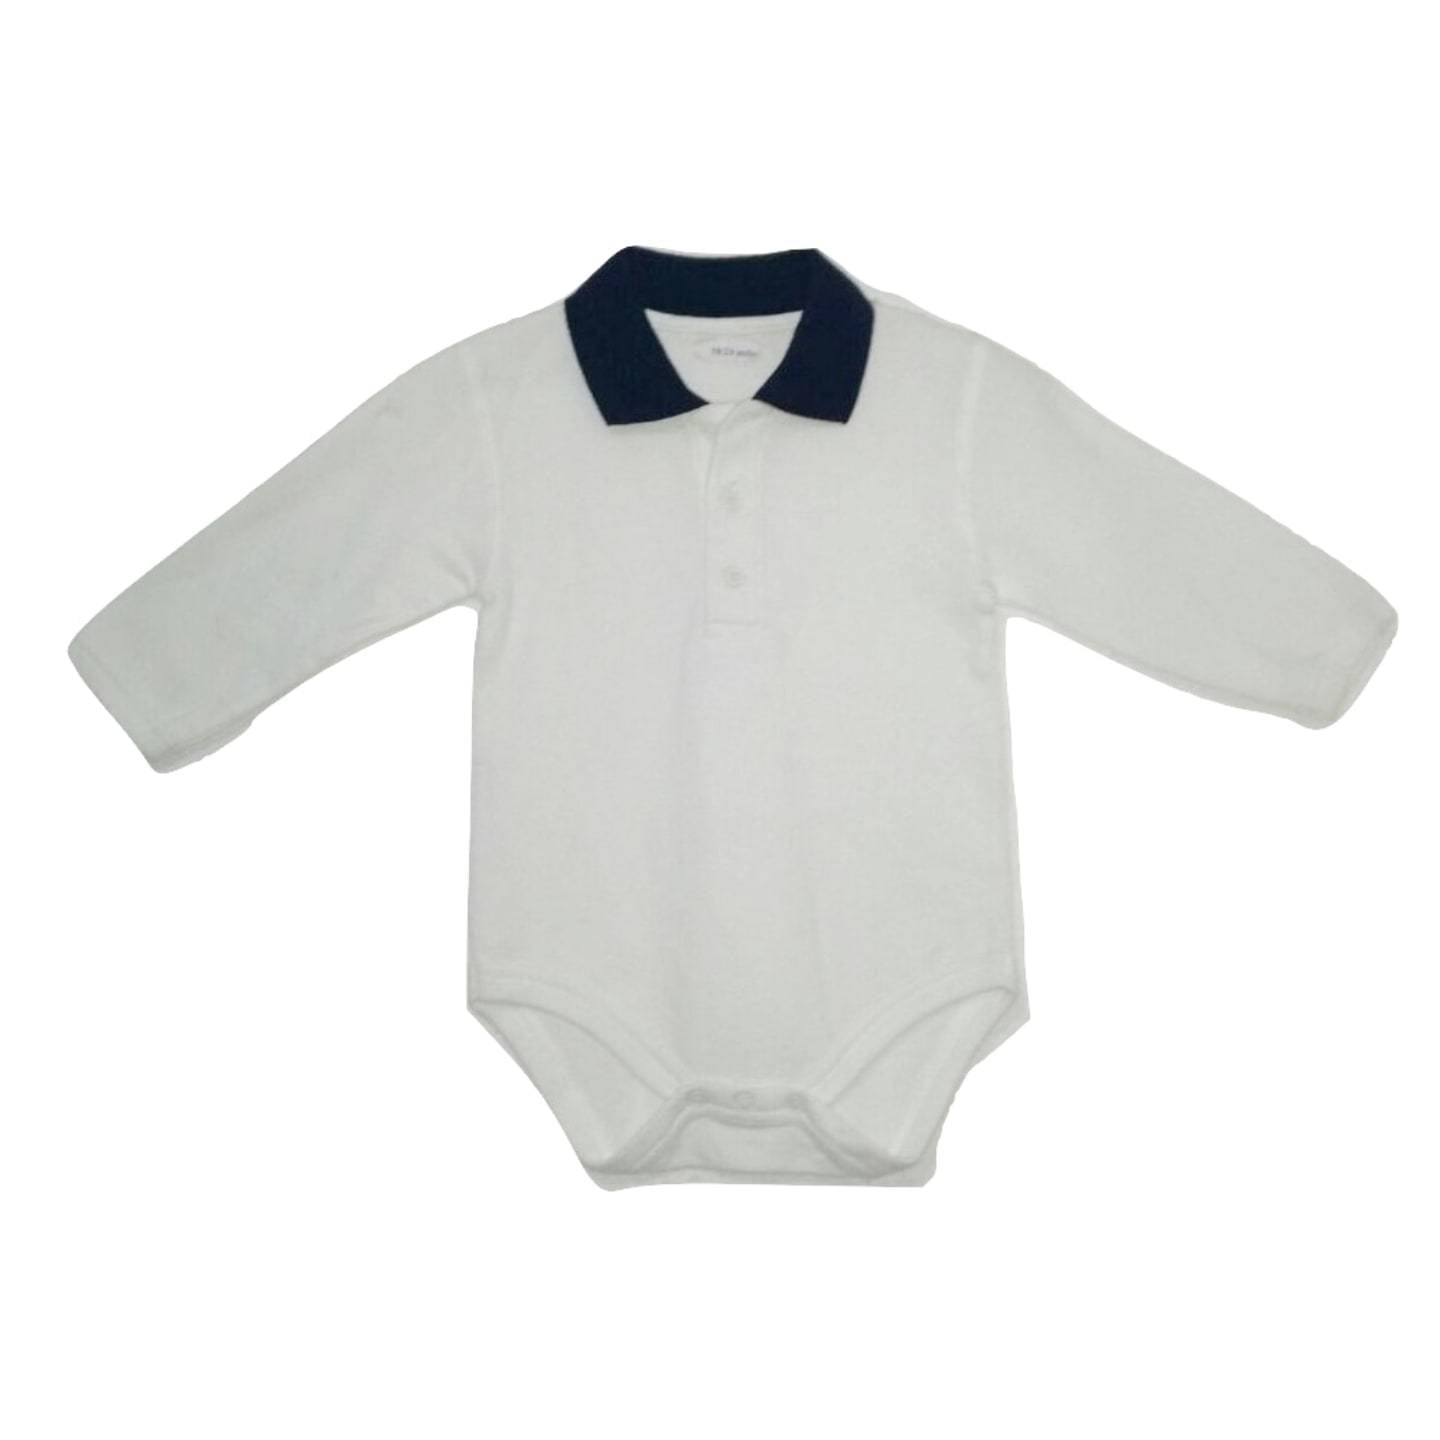 Longsleeve White with Navy Collar Rugby Bodysuit - Stockpoint Apparel Outlet